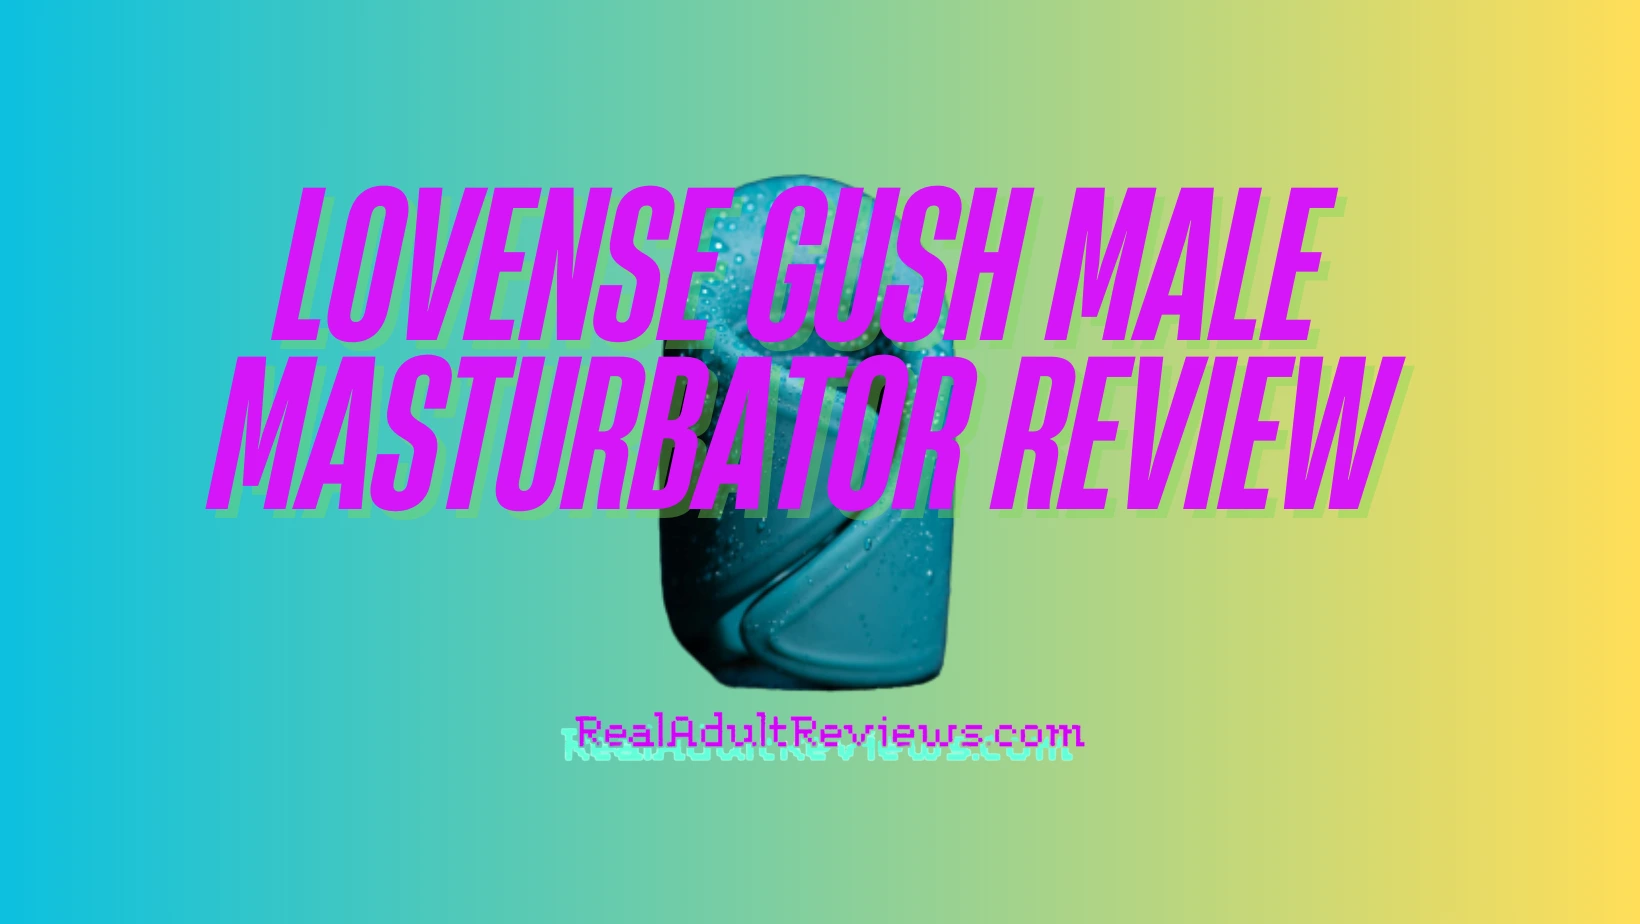 Lovense Gush Male Masturbator Honest Review: Who could evaluate?